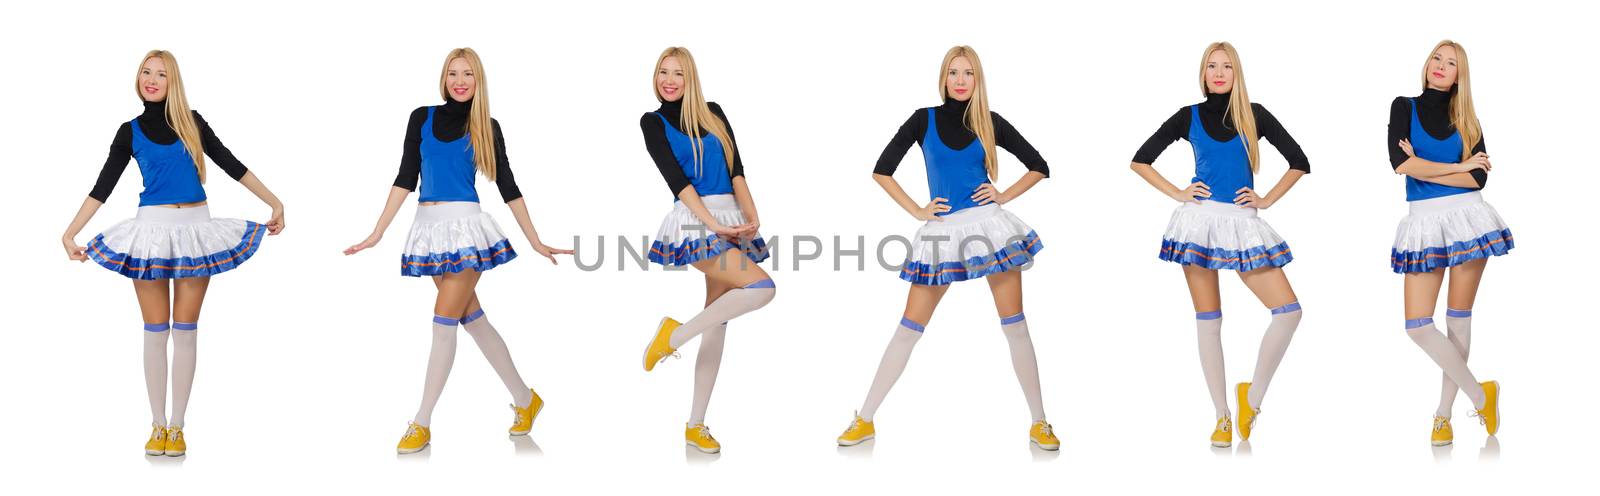 Cheerleader isolated on the white background by Elnur